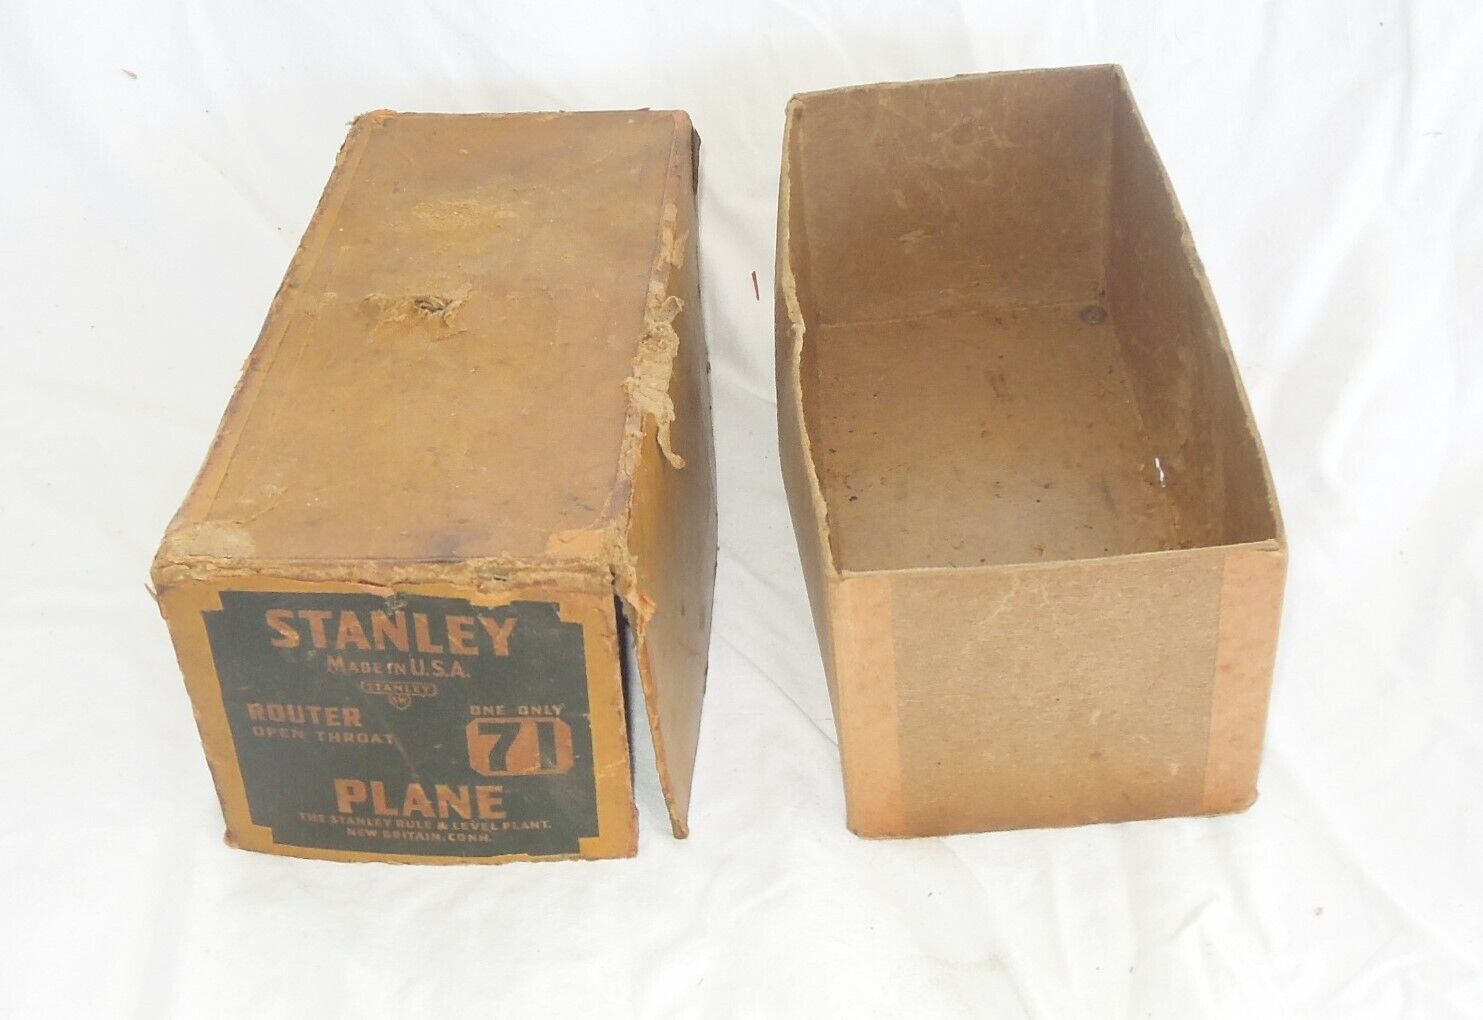 Stanley 1942 wartime era type 12 open throat router plane in box with cutters